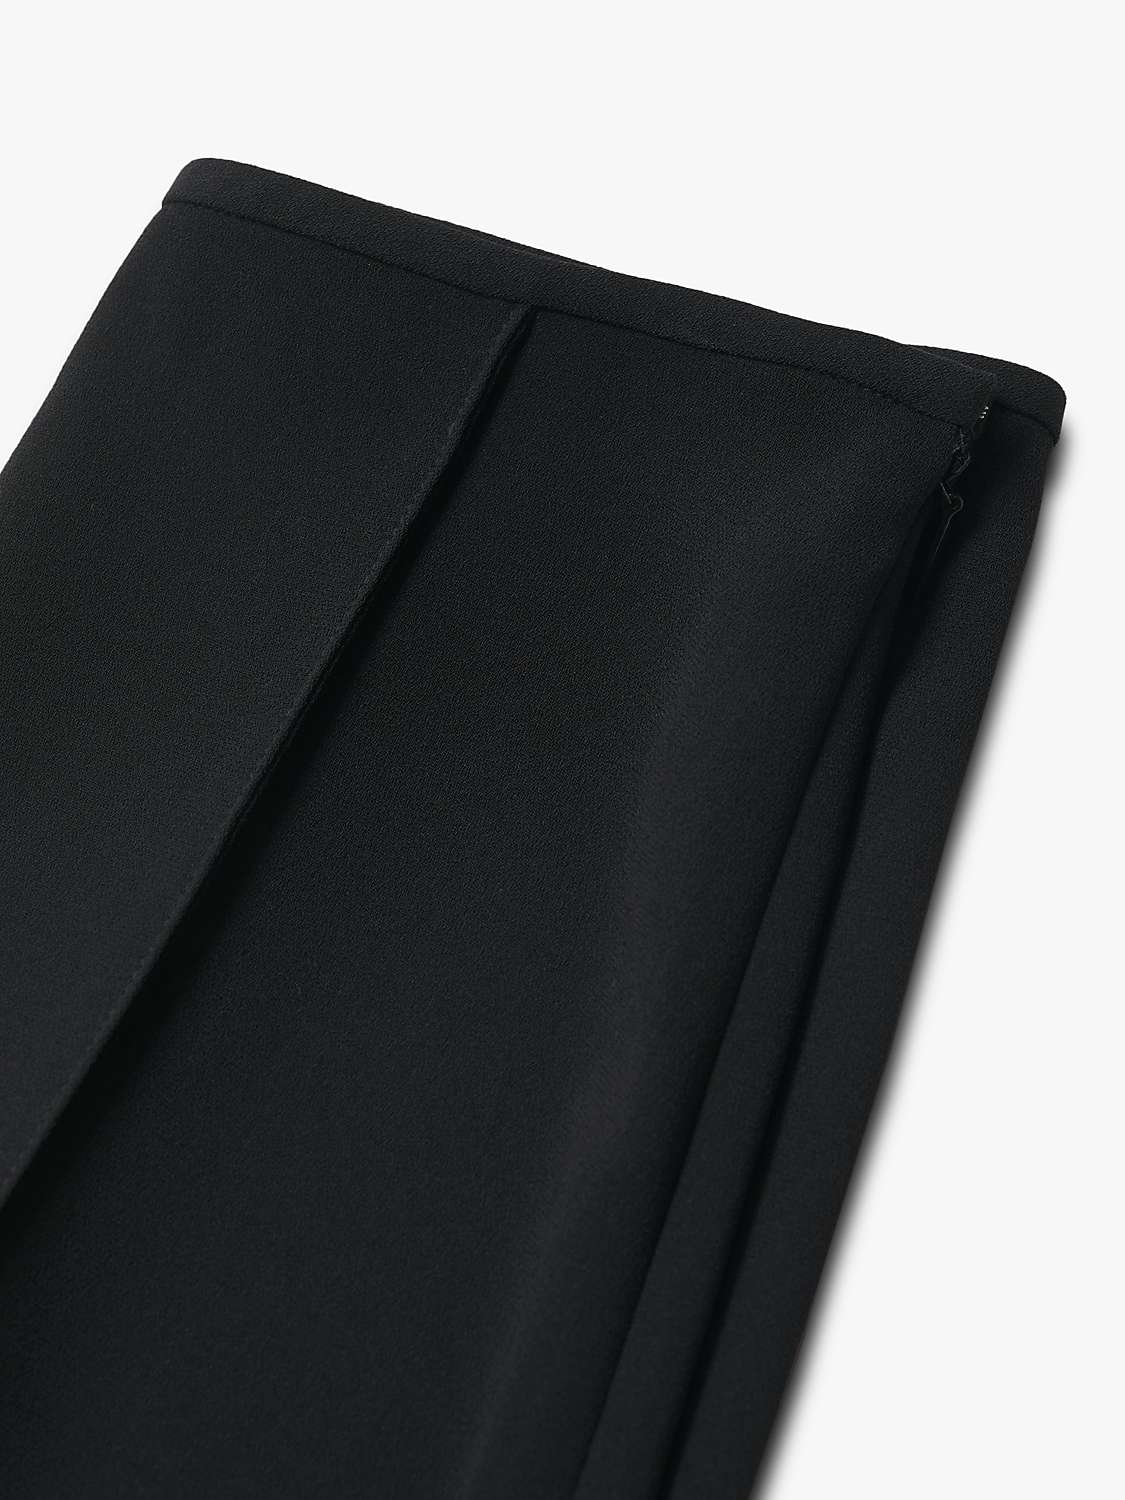 Buy Mango Pleated Culotte Trousers, Black Online at johnlewis.com